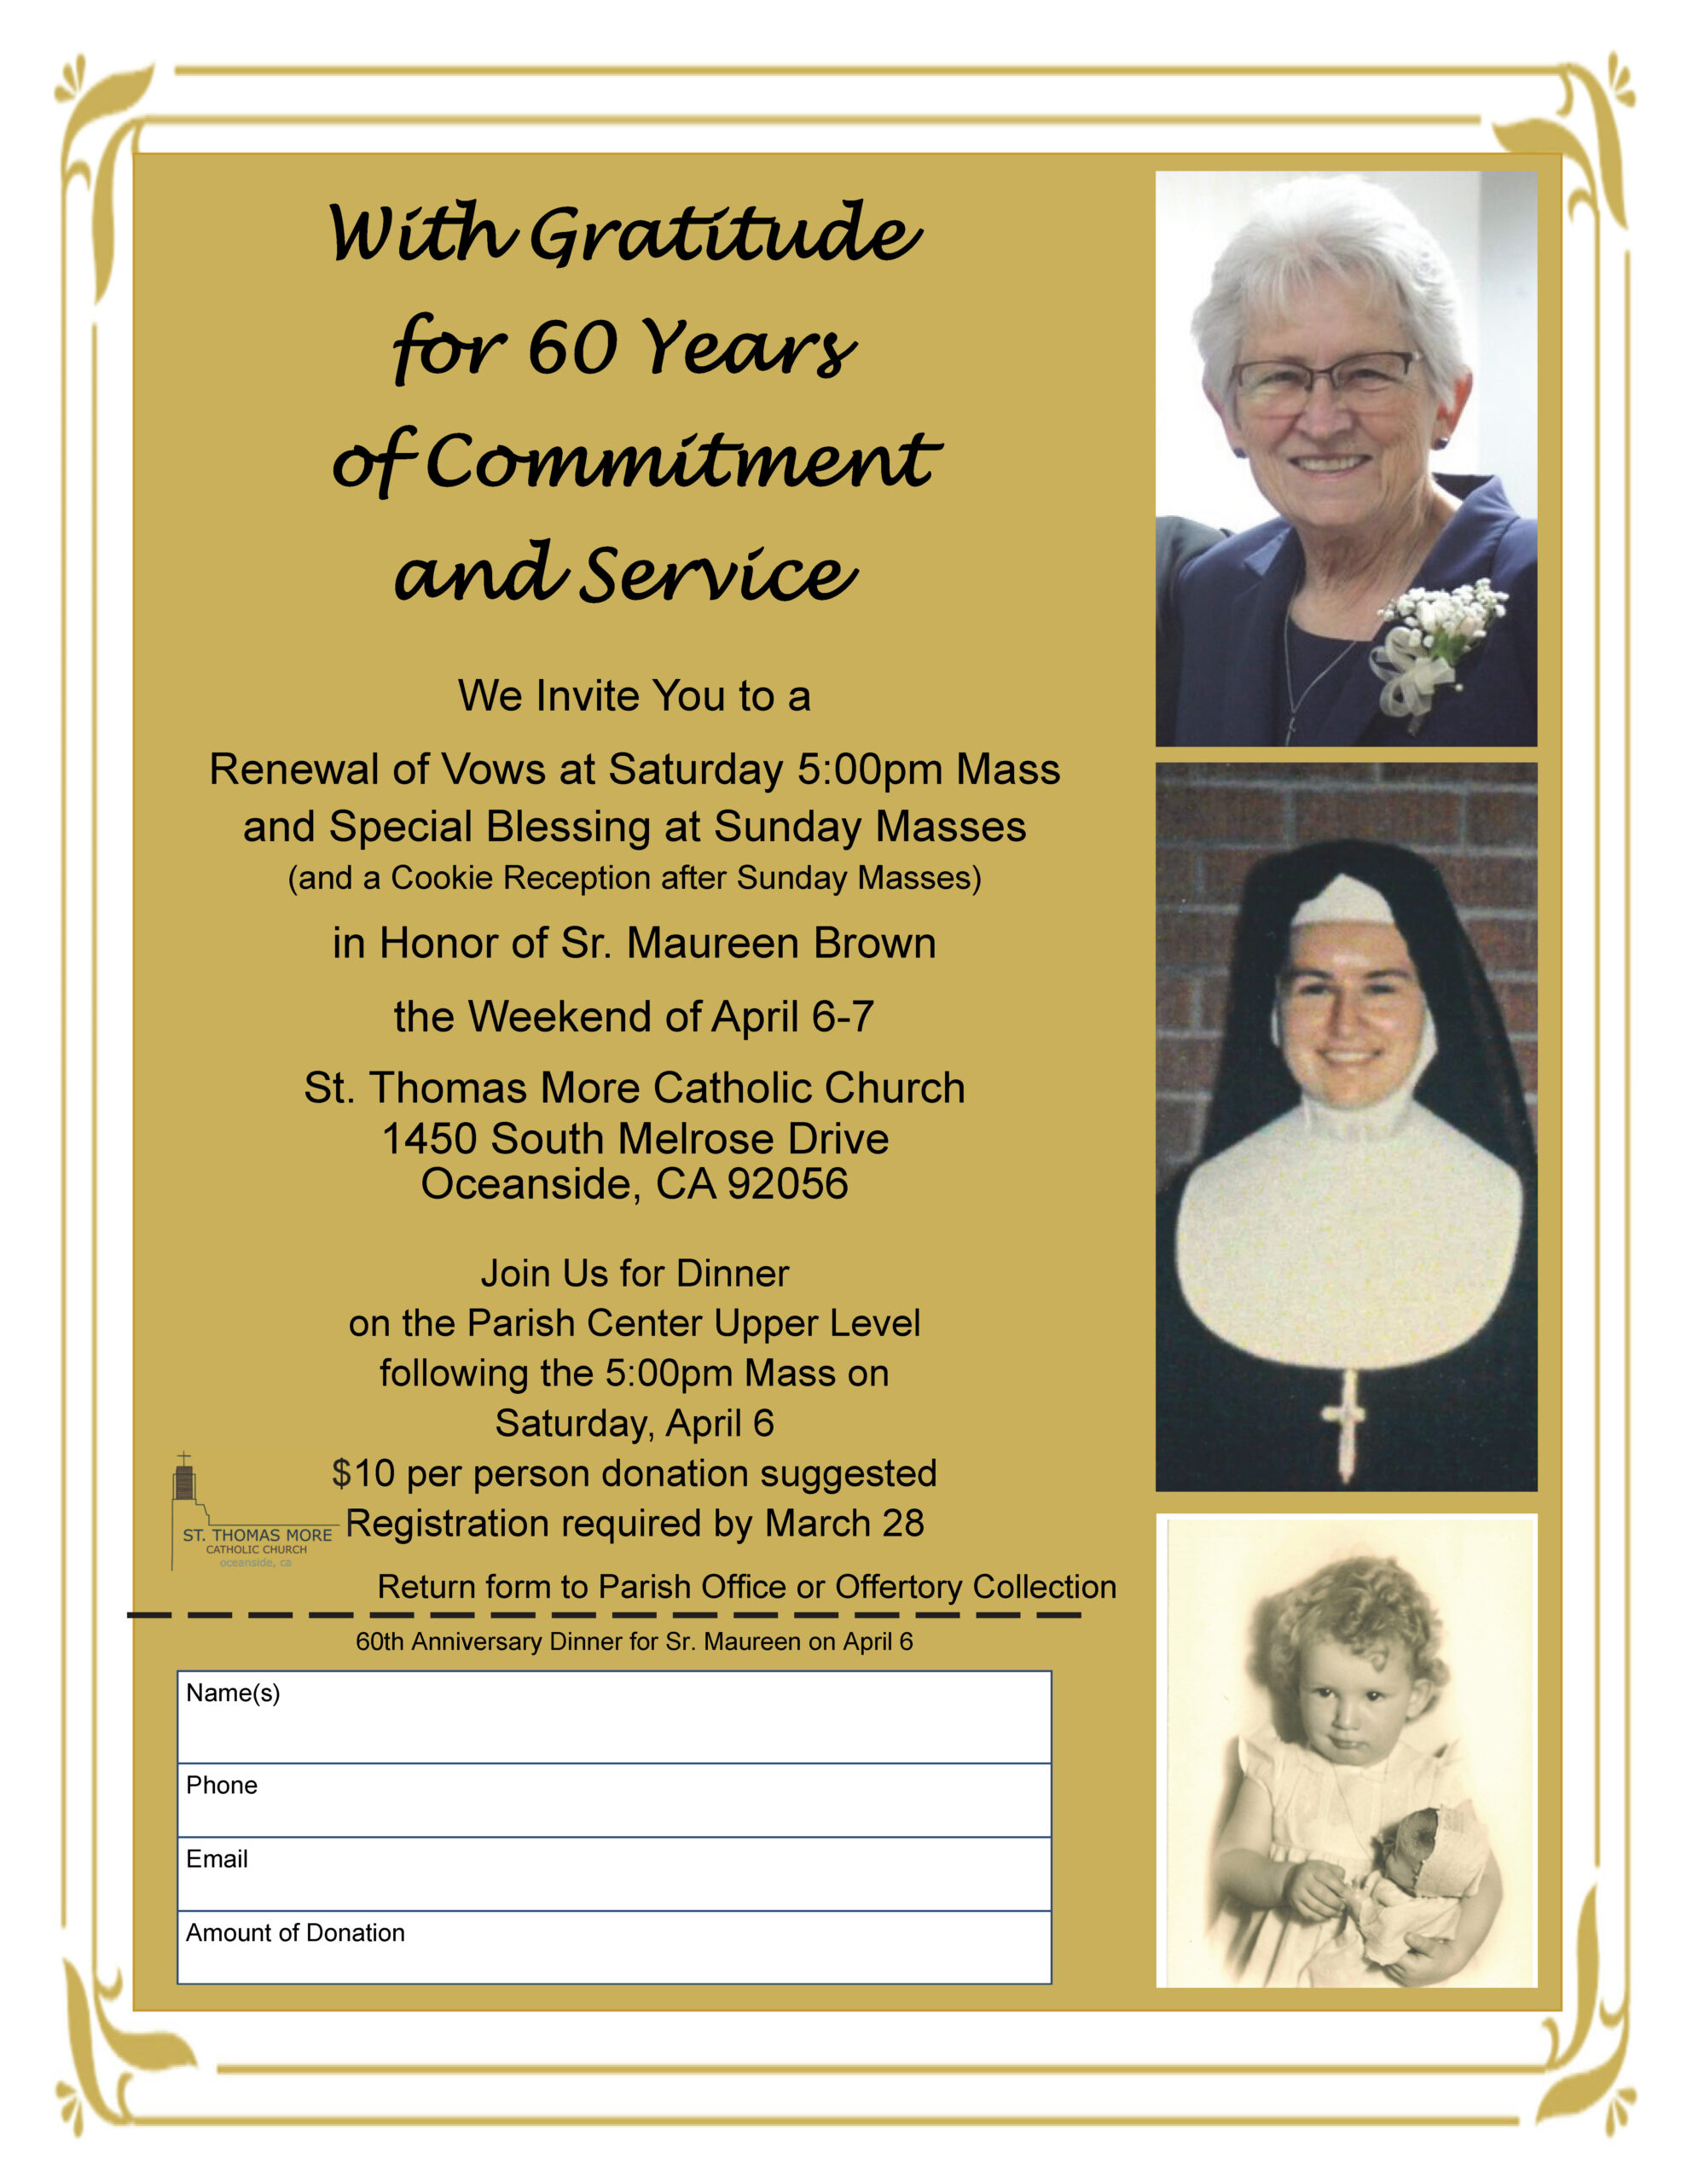 Join Us to Honor Sr. Maureen!